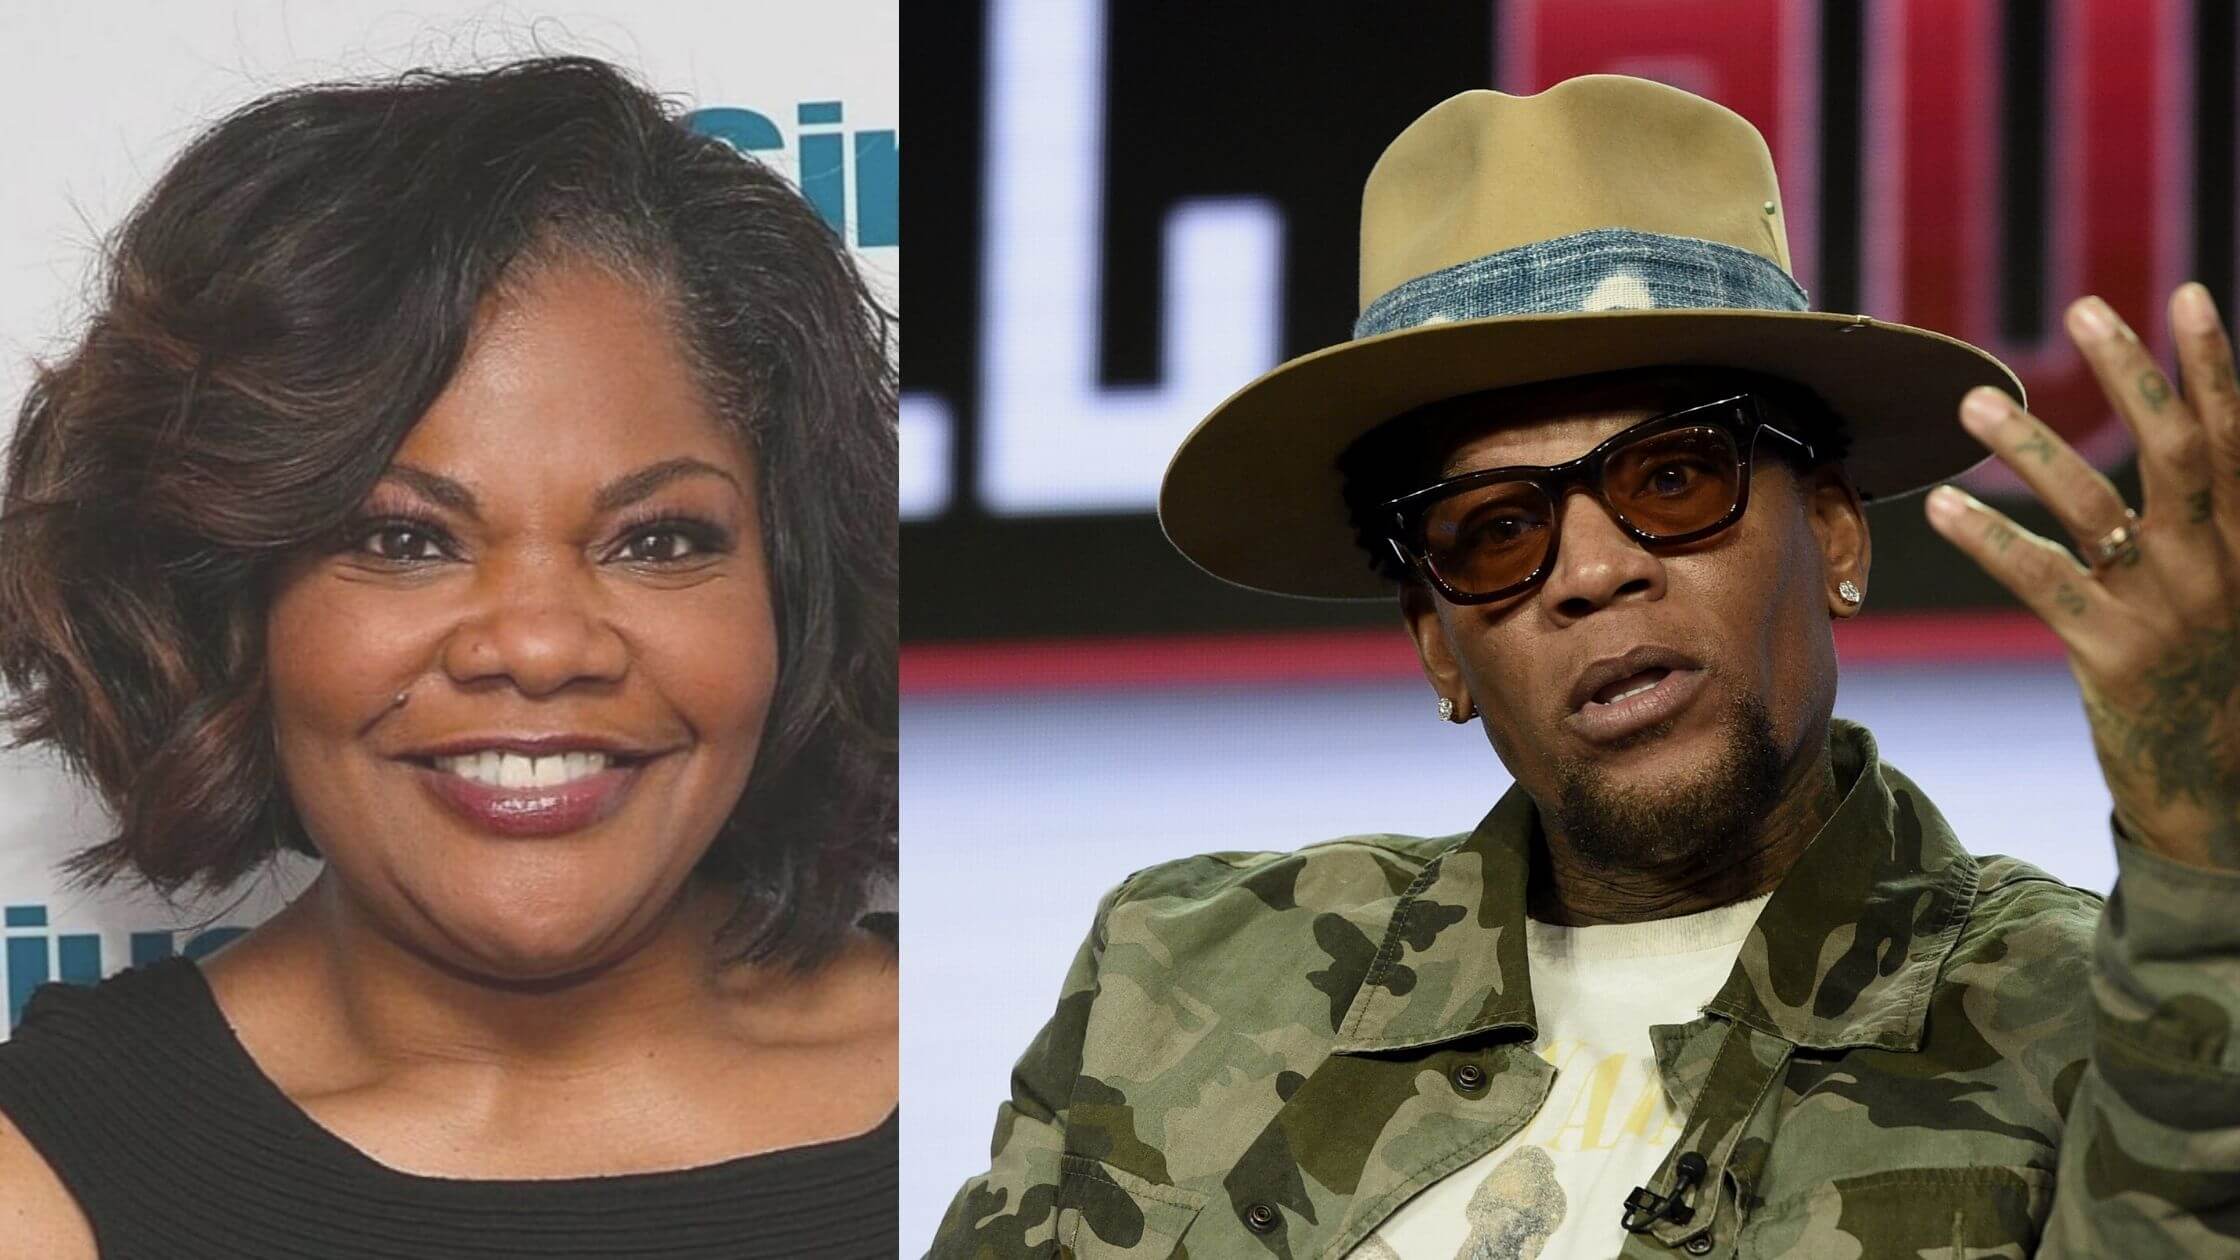 Mo'Nique And D.L. Hughley Feud Over Headliner Status For Their Comedy Show